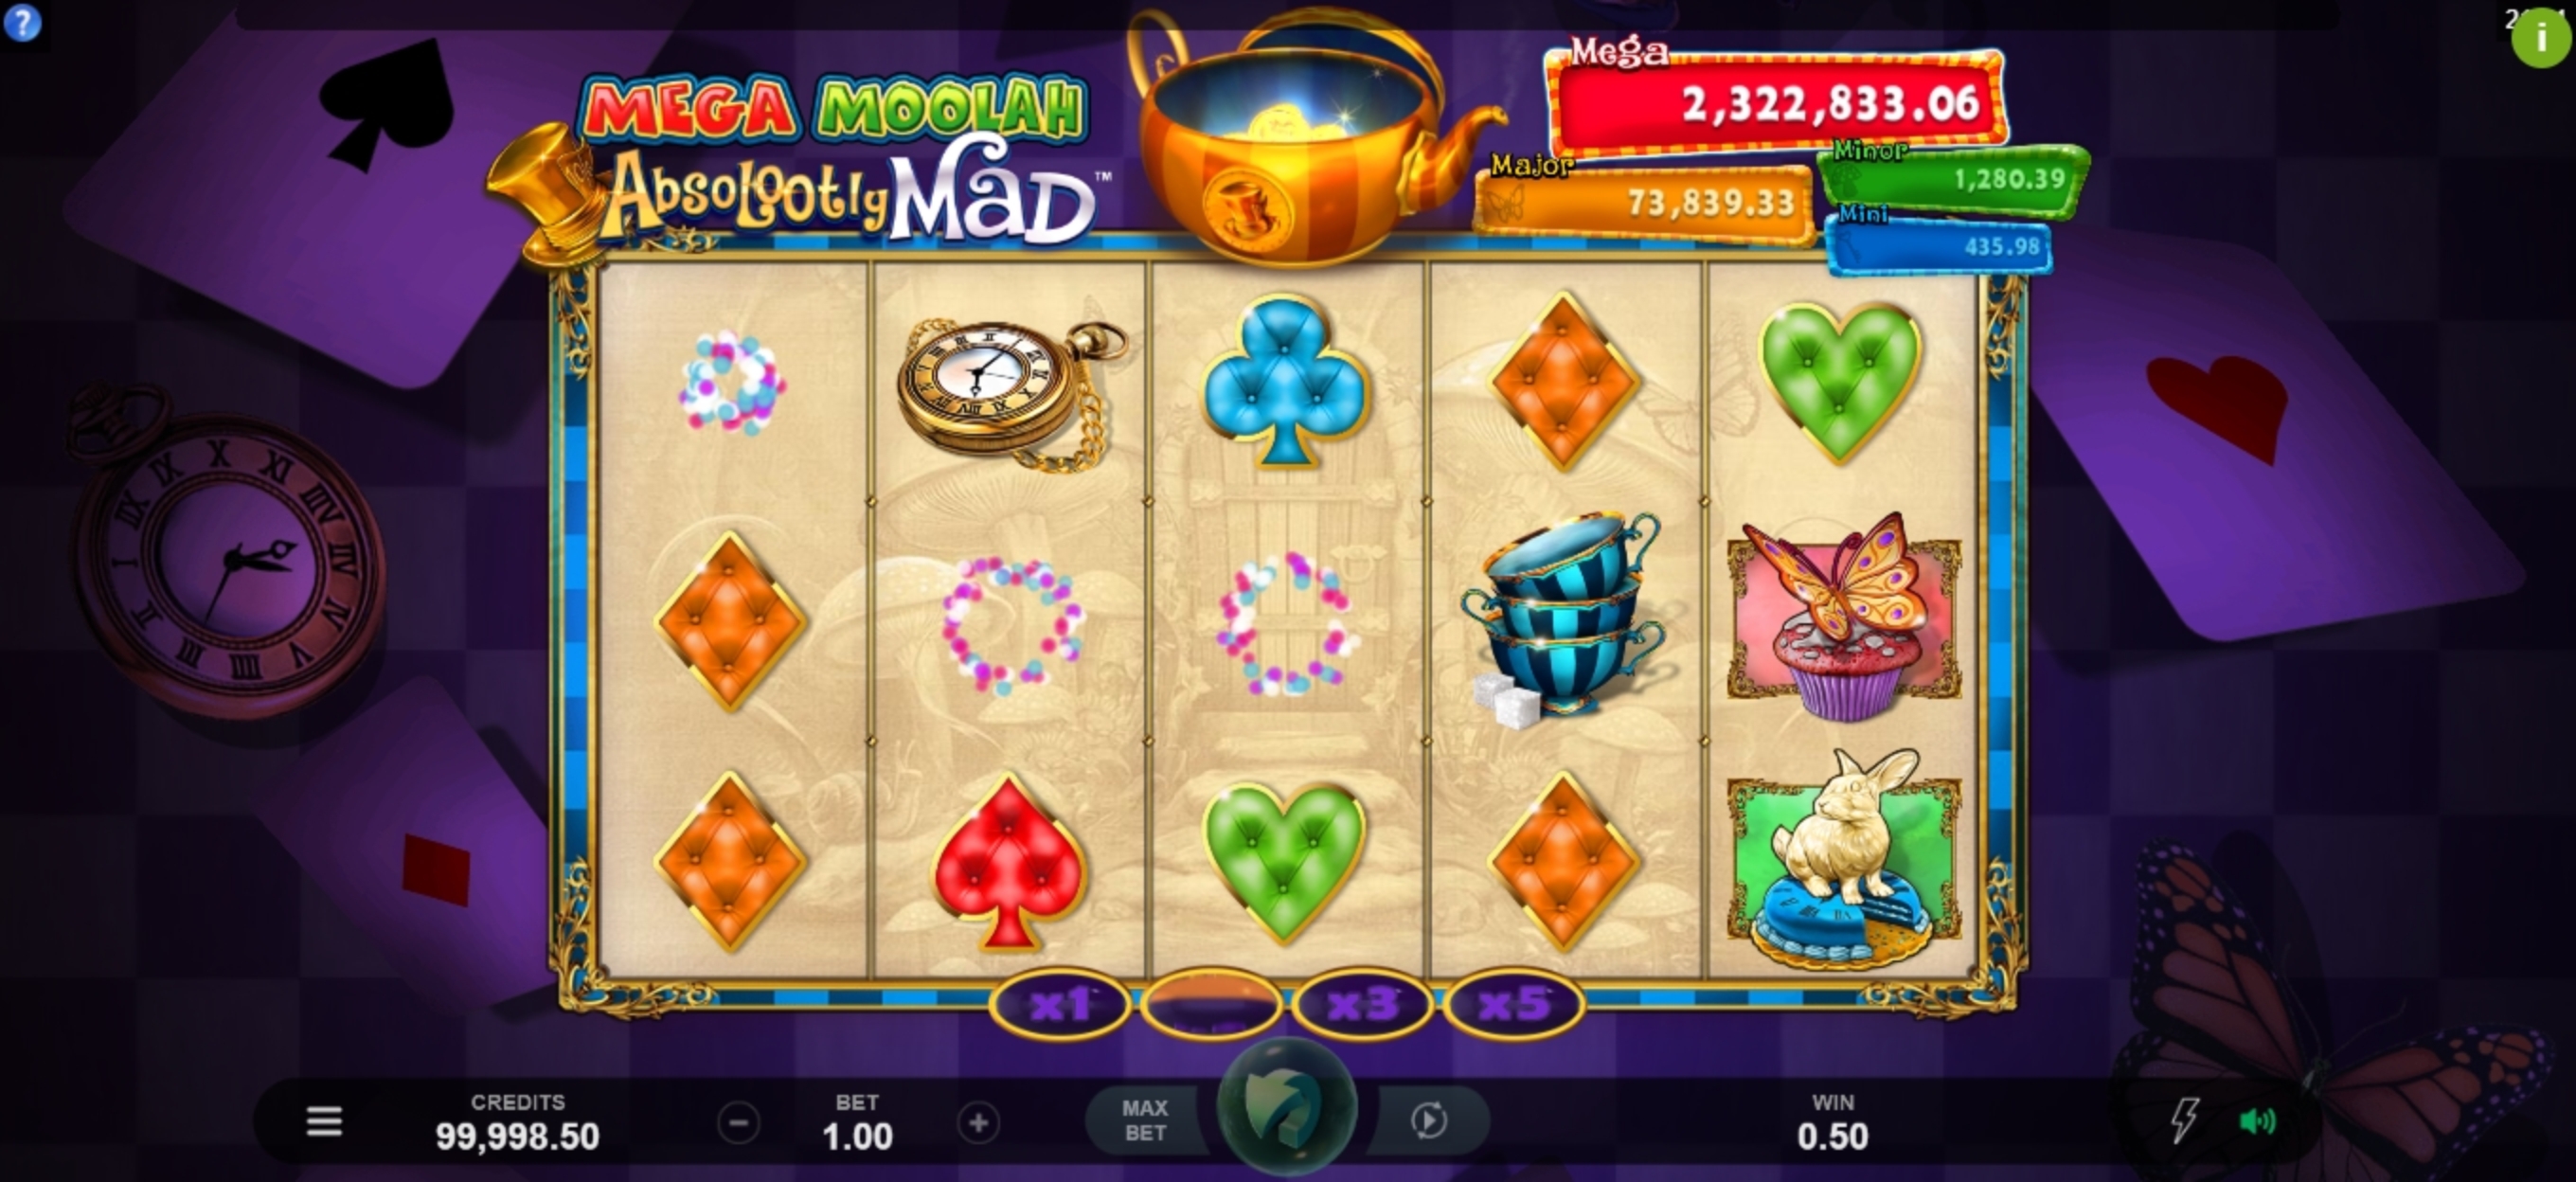 Win Money in Absolootly Mad: Mega Moolah Free Slot Game by Triple Edge Studios